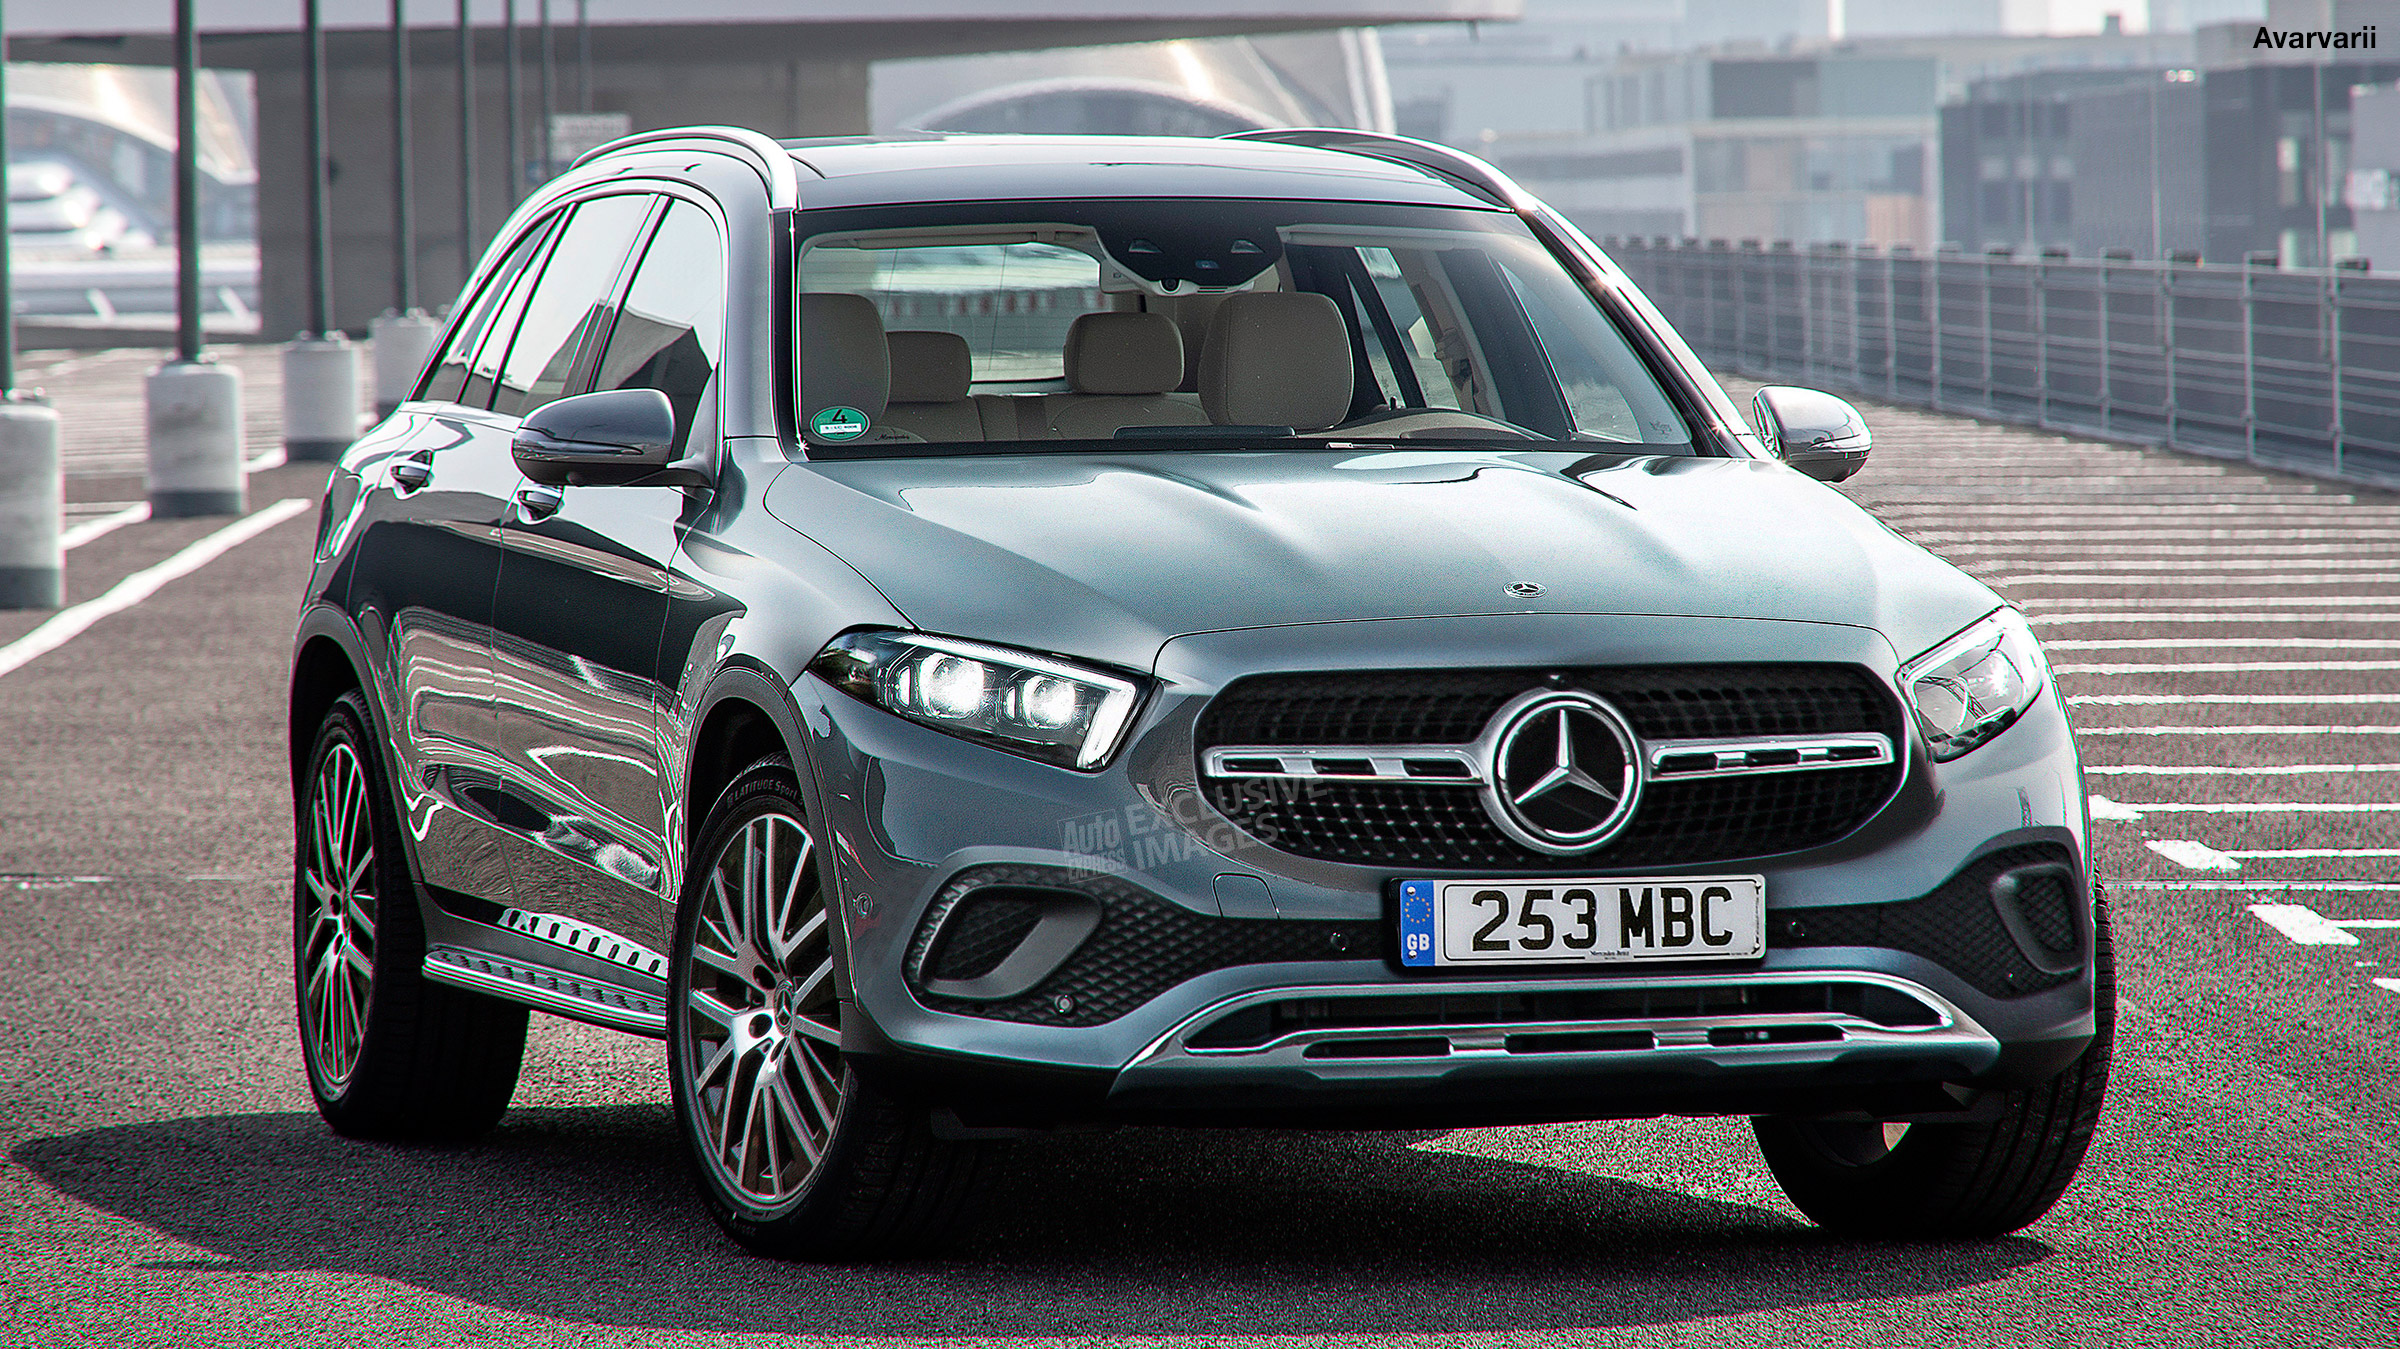 New 2022 Mercedes GLC to rival Audi Q5 and BMW X3 with ...